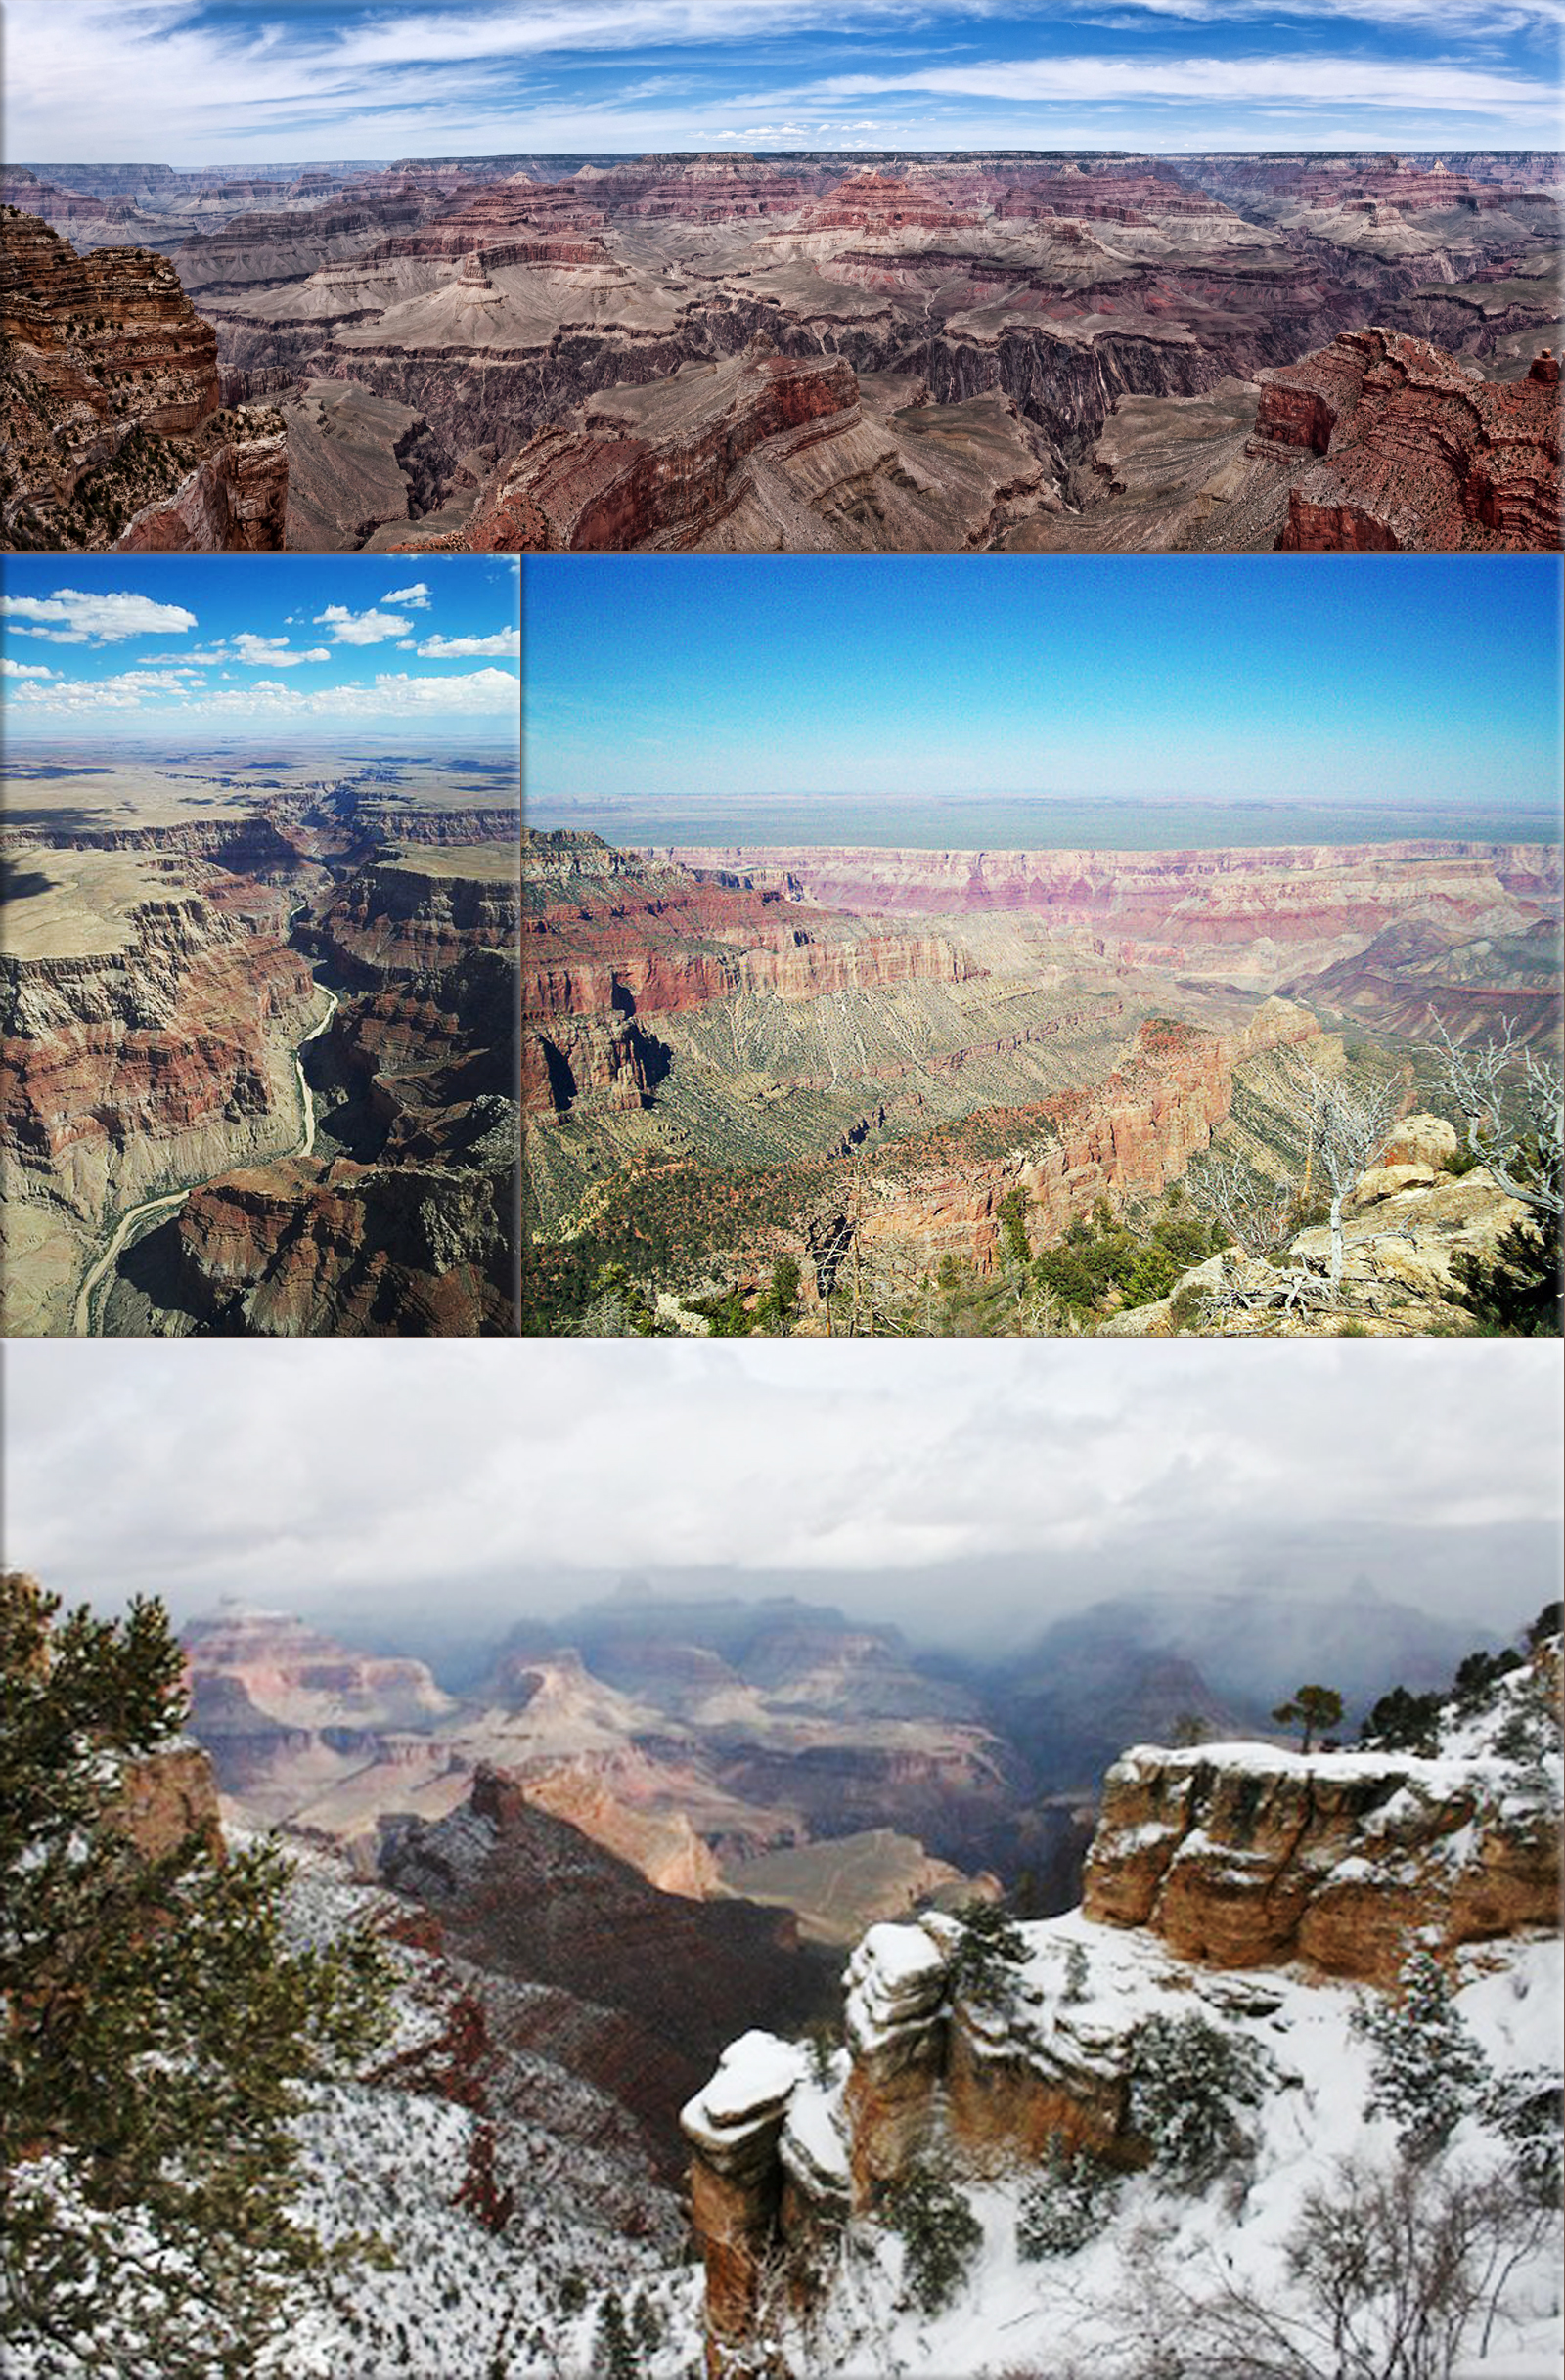 Grand Canyon National Park: A view from the South Rim; An aerial view of the Little Colorado River Gorge near East Rim of Grand Canyon; View of the North Rim of the Grand Canyon; South rim in winter